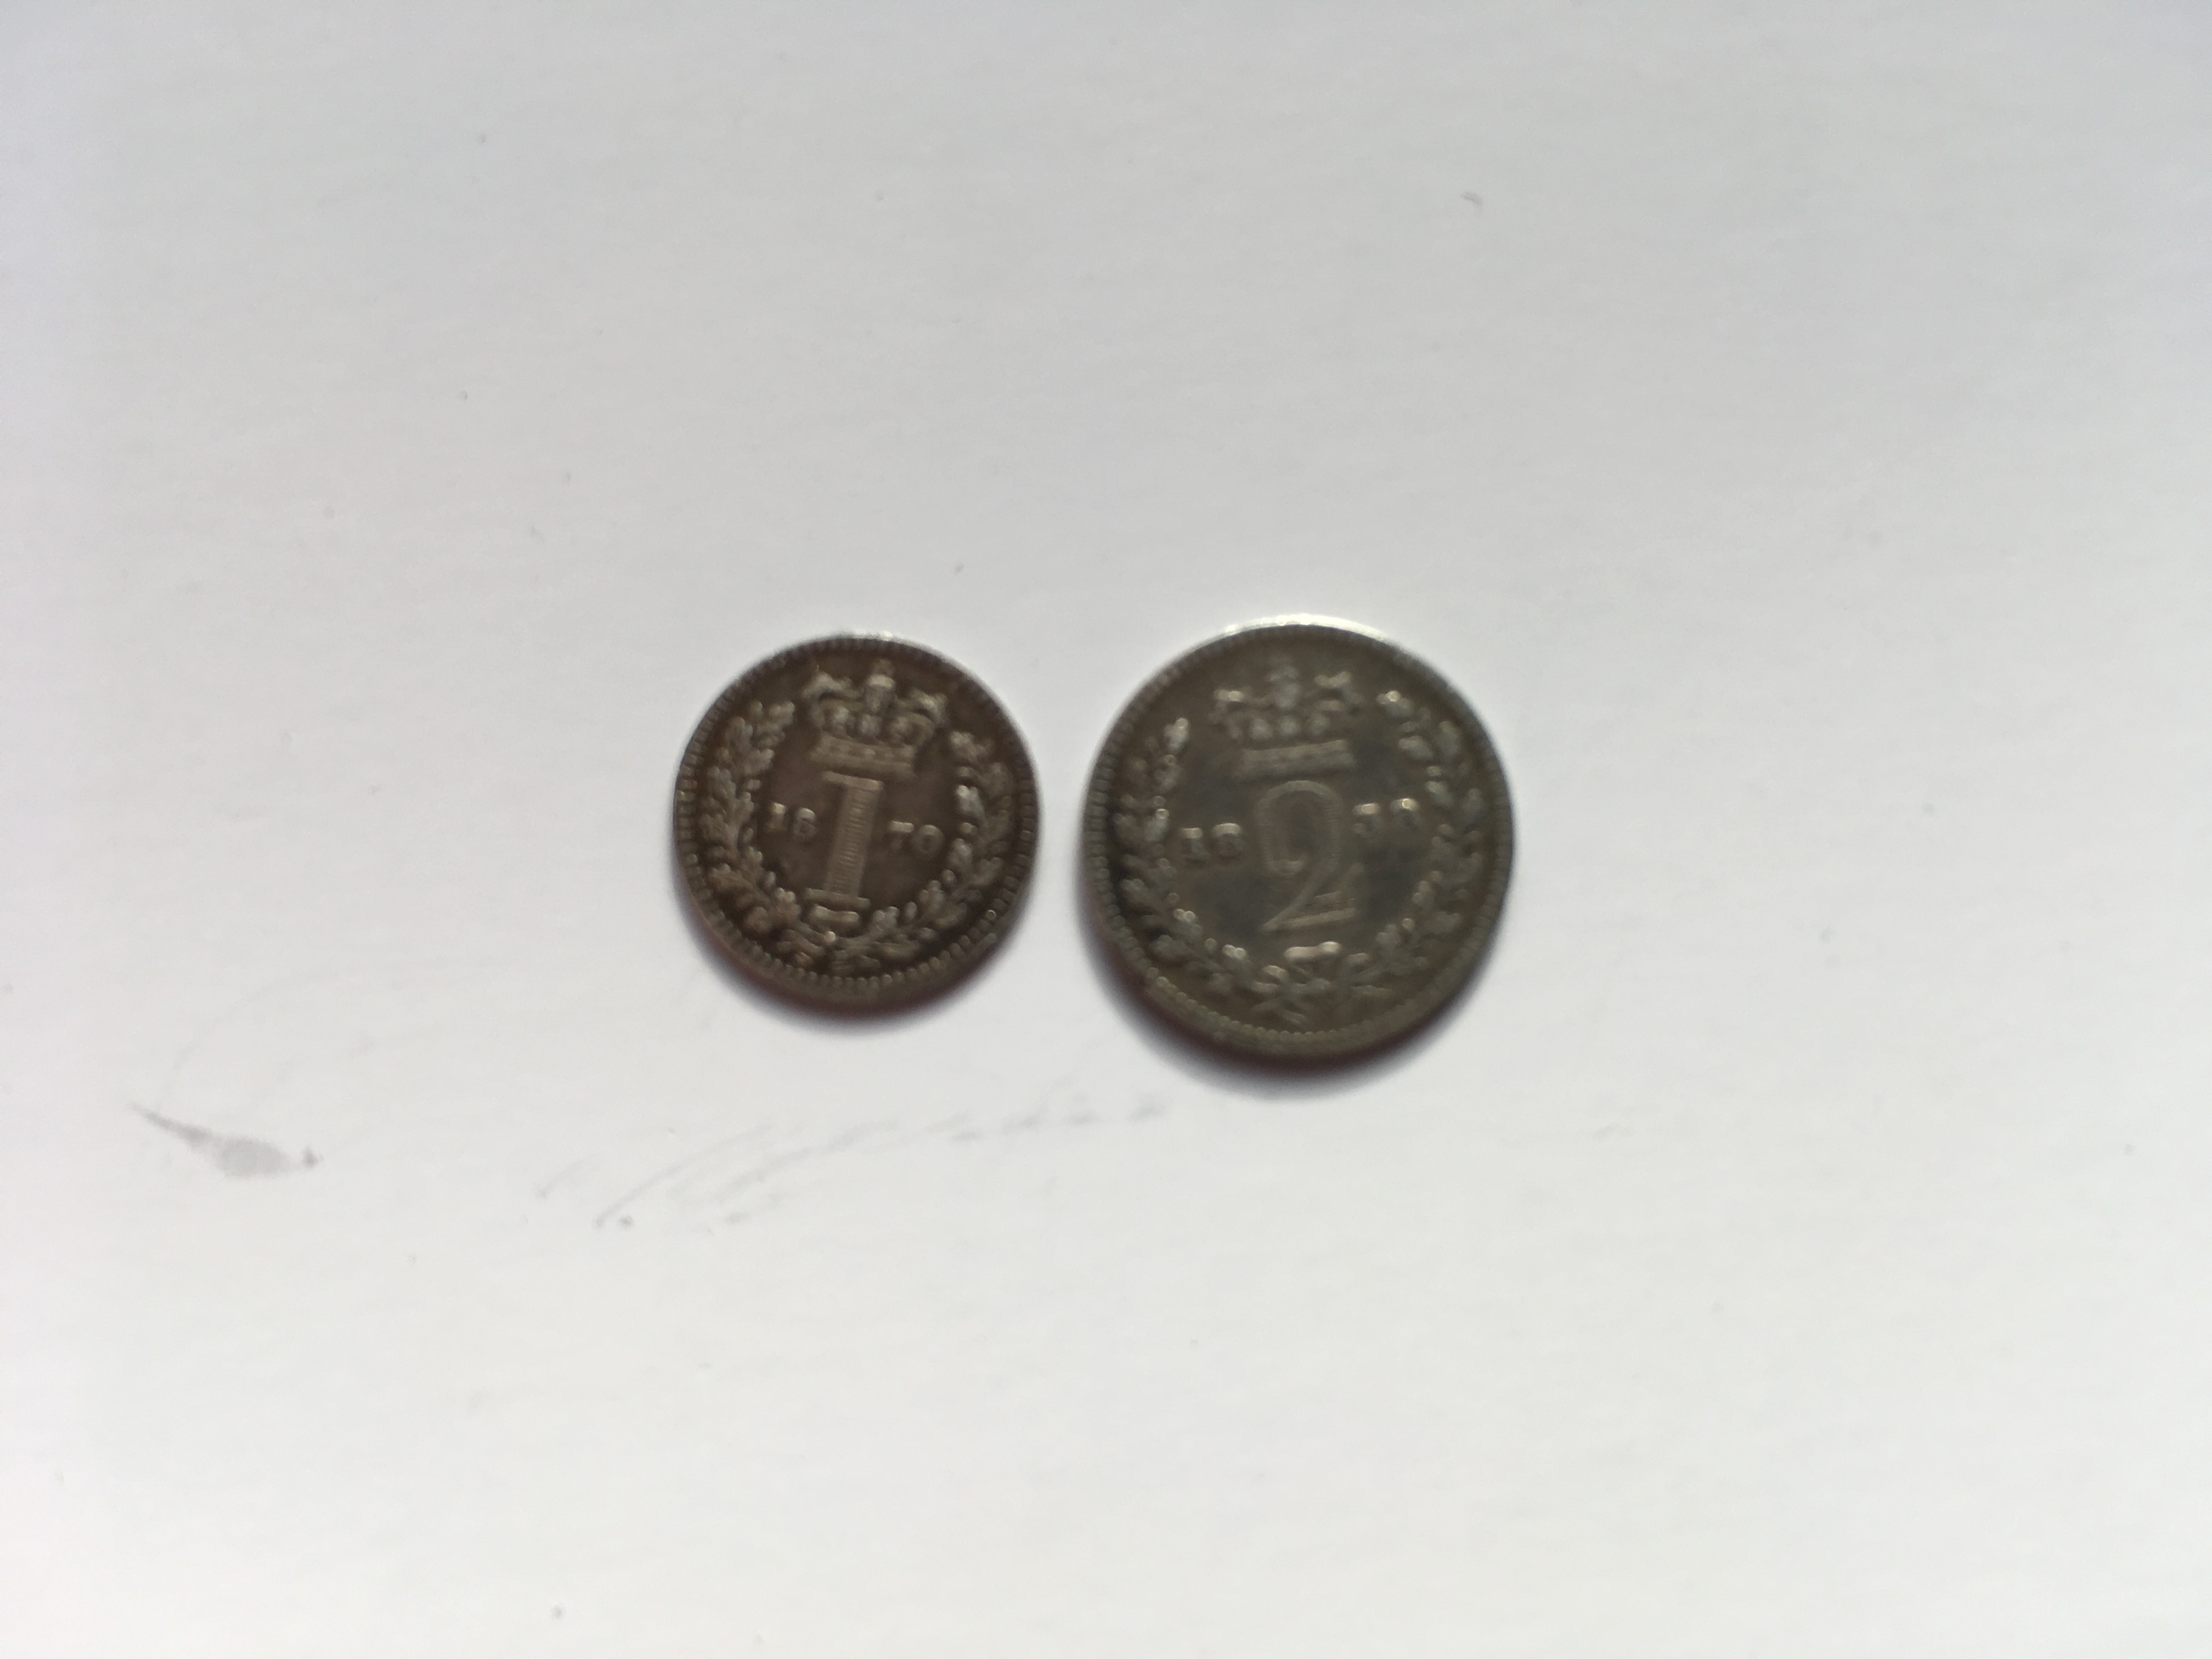 COINS: GB MAUNDY PENNY 1870 AND TWO PENCE 1838. - Image 5 of 8